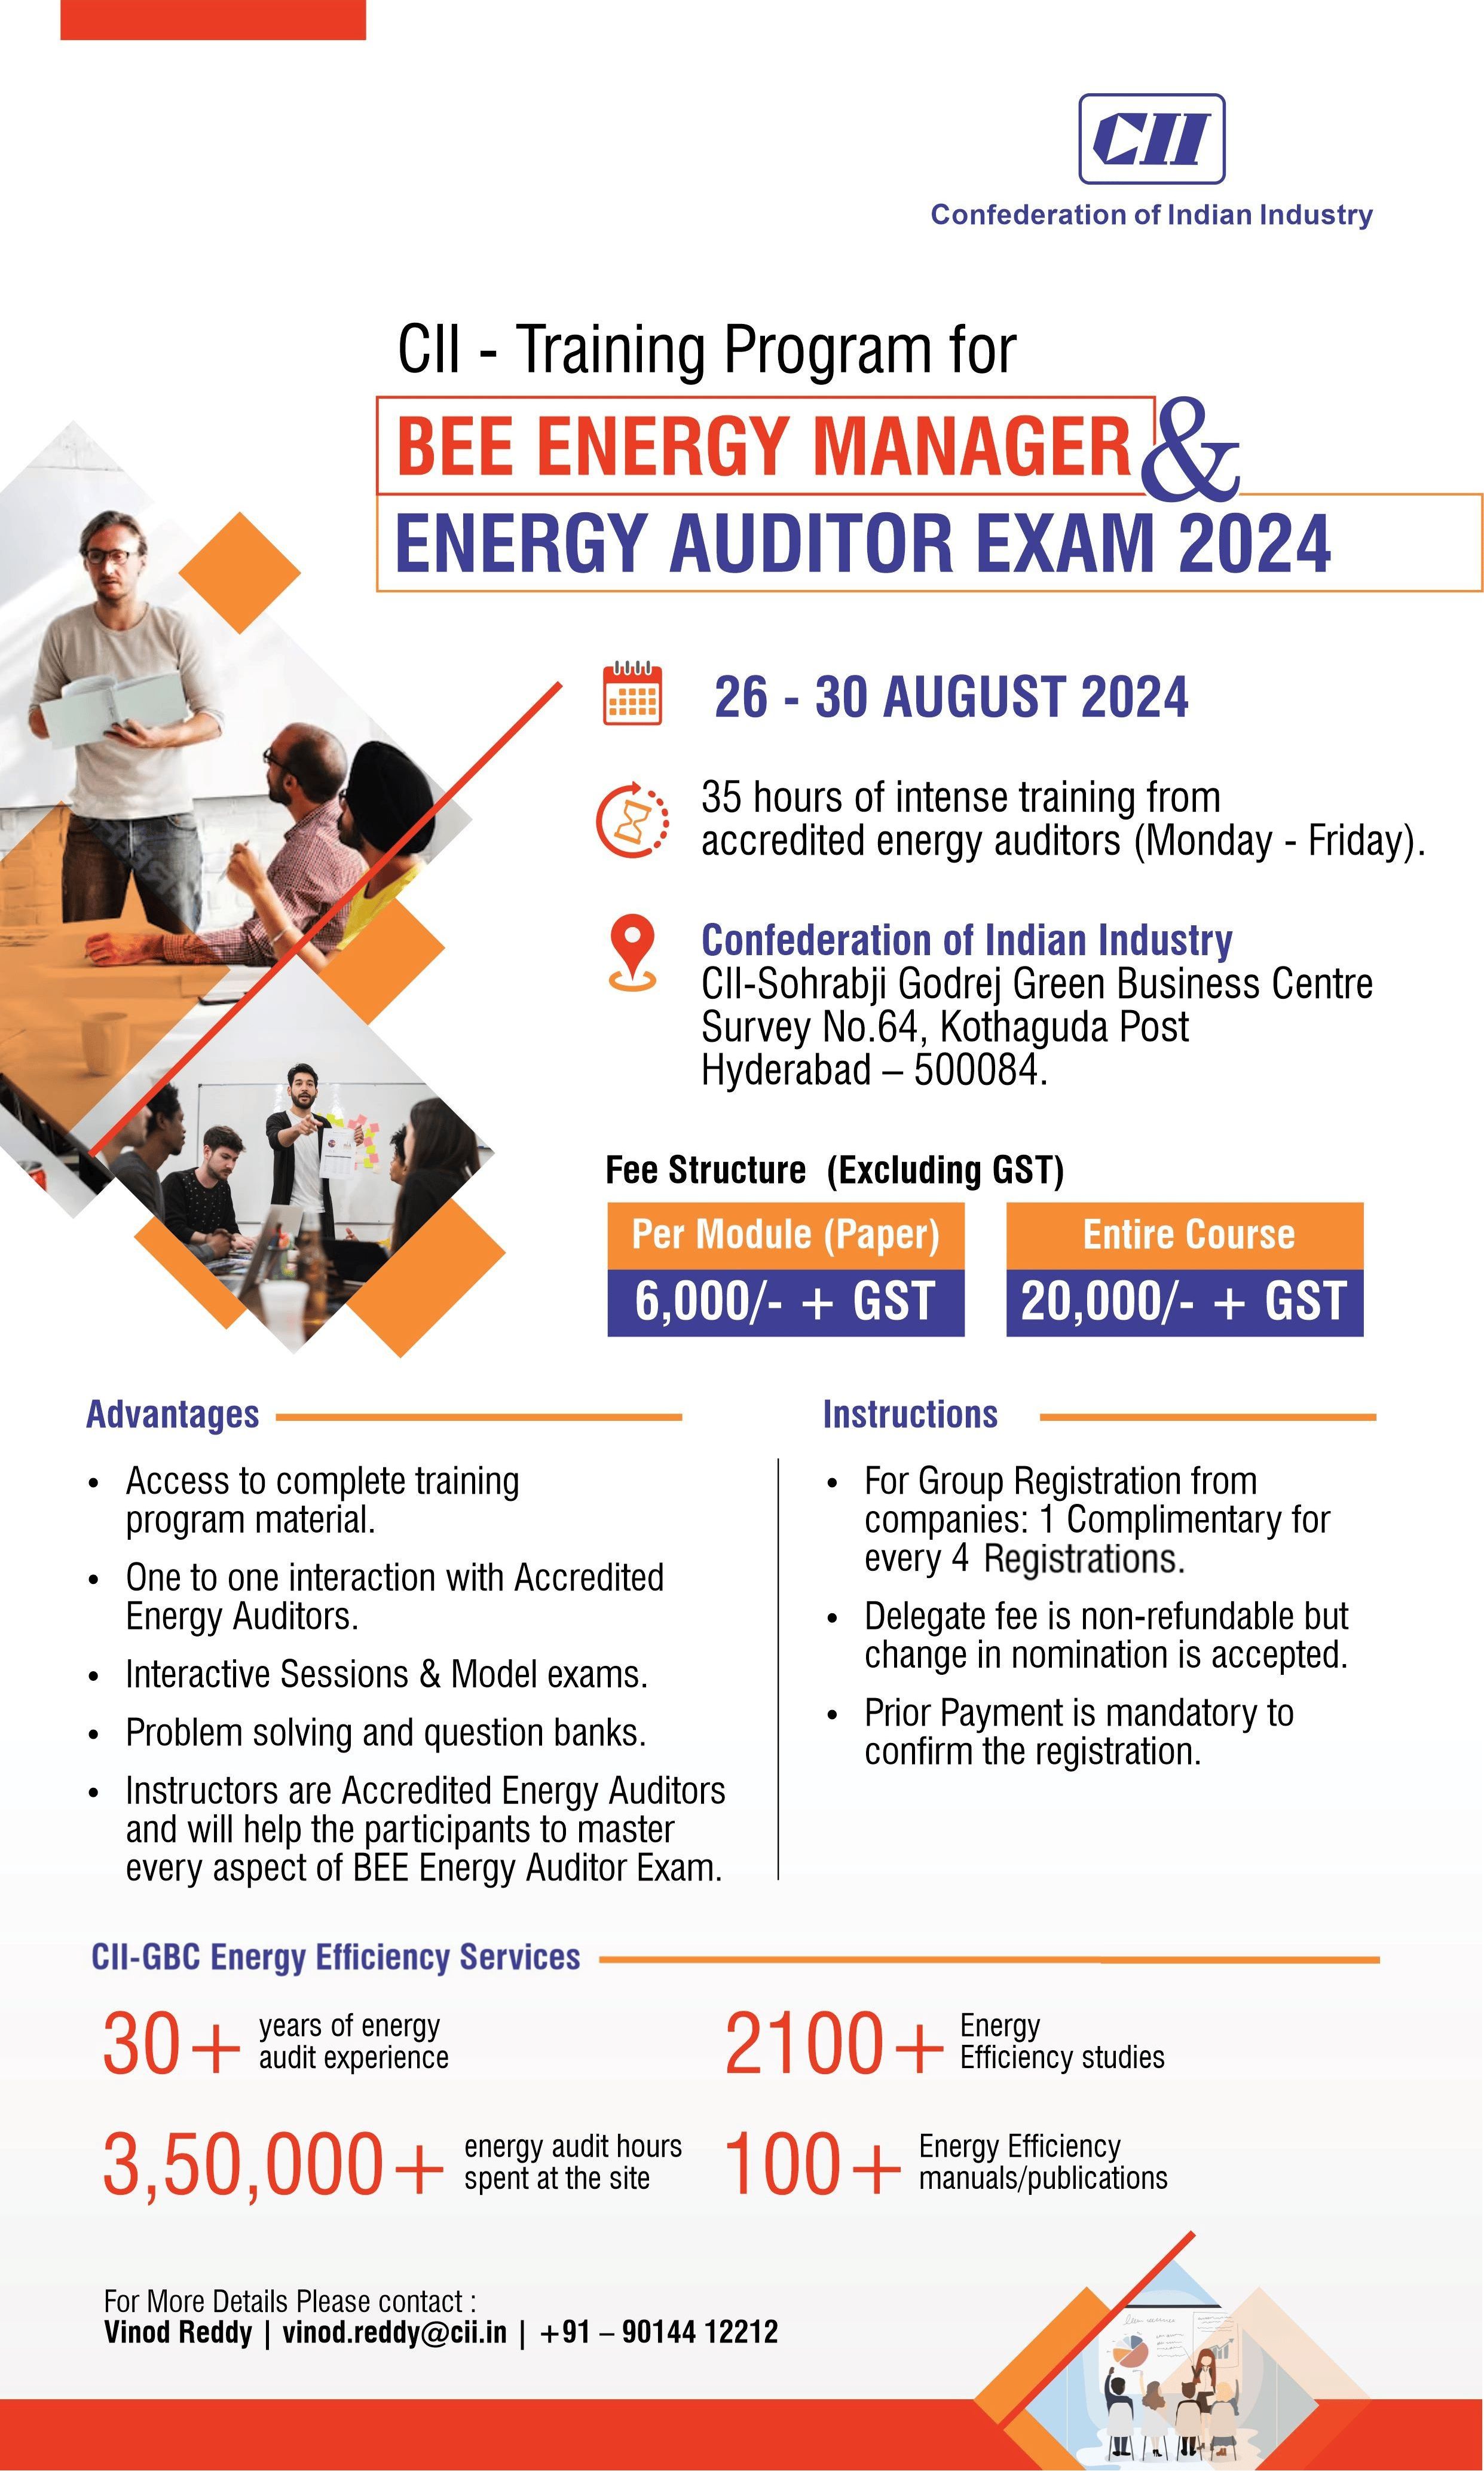 Training Program for BEE Energy Manager and Energy Auditor Exam 2024